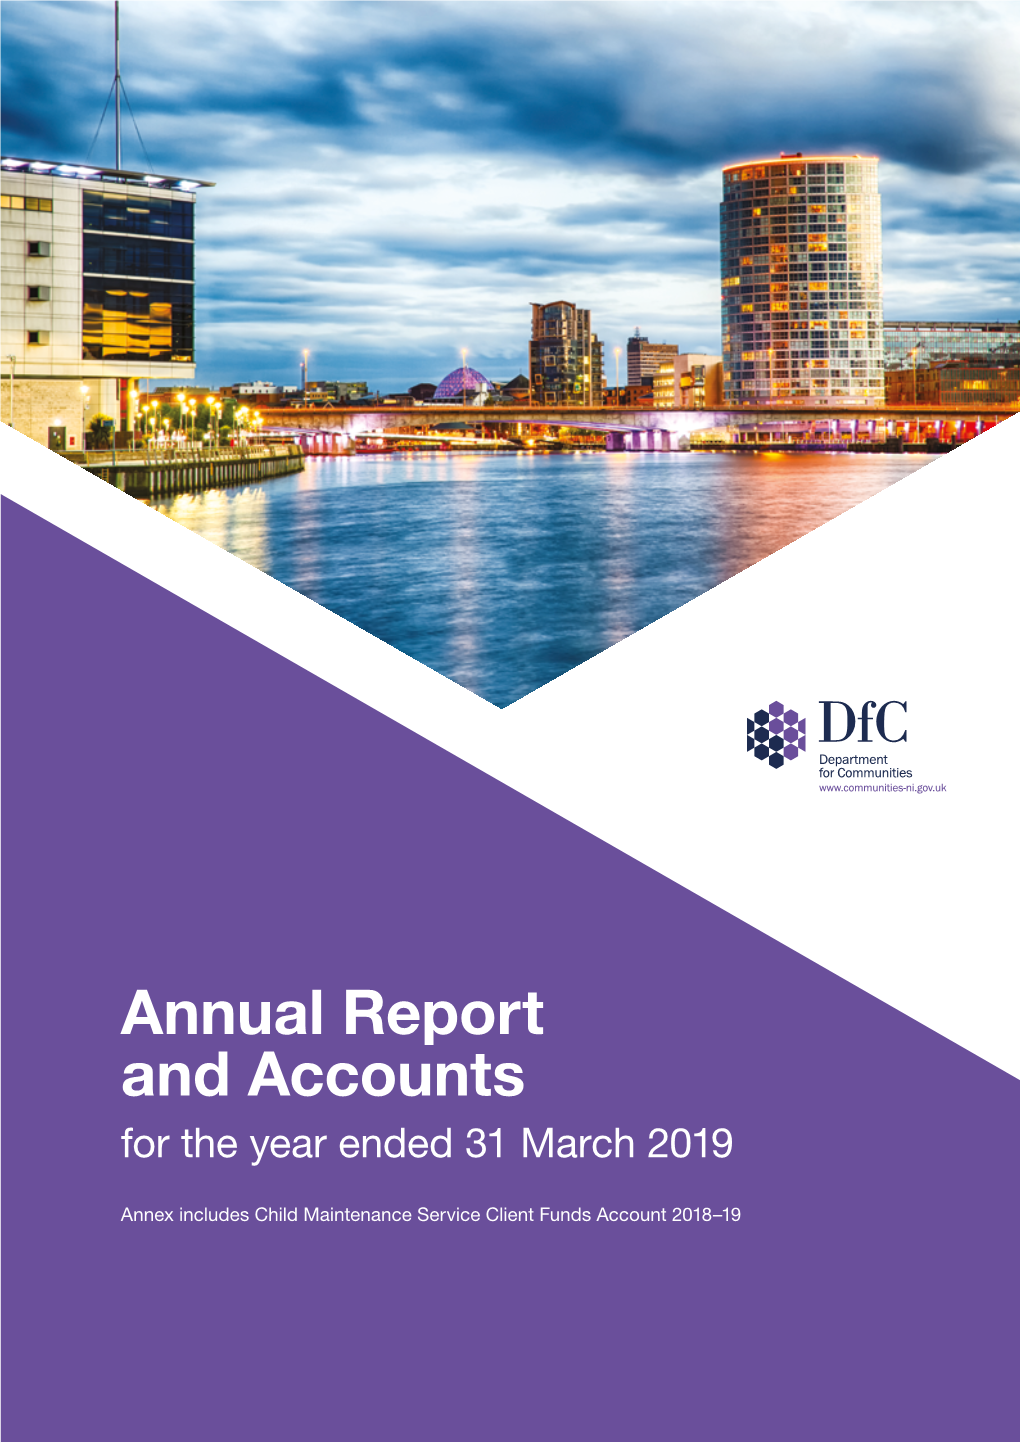 Department for Communities Annual Report and Accounts 2018-19